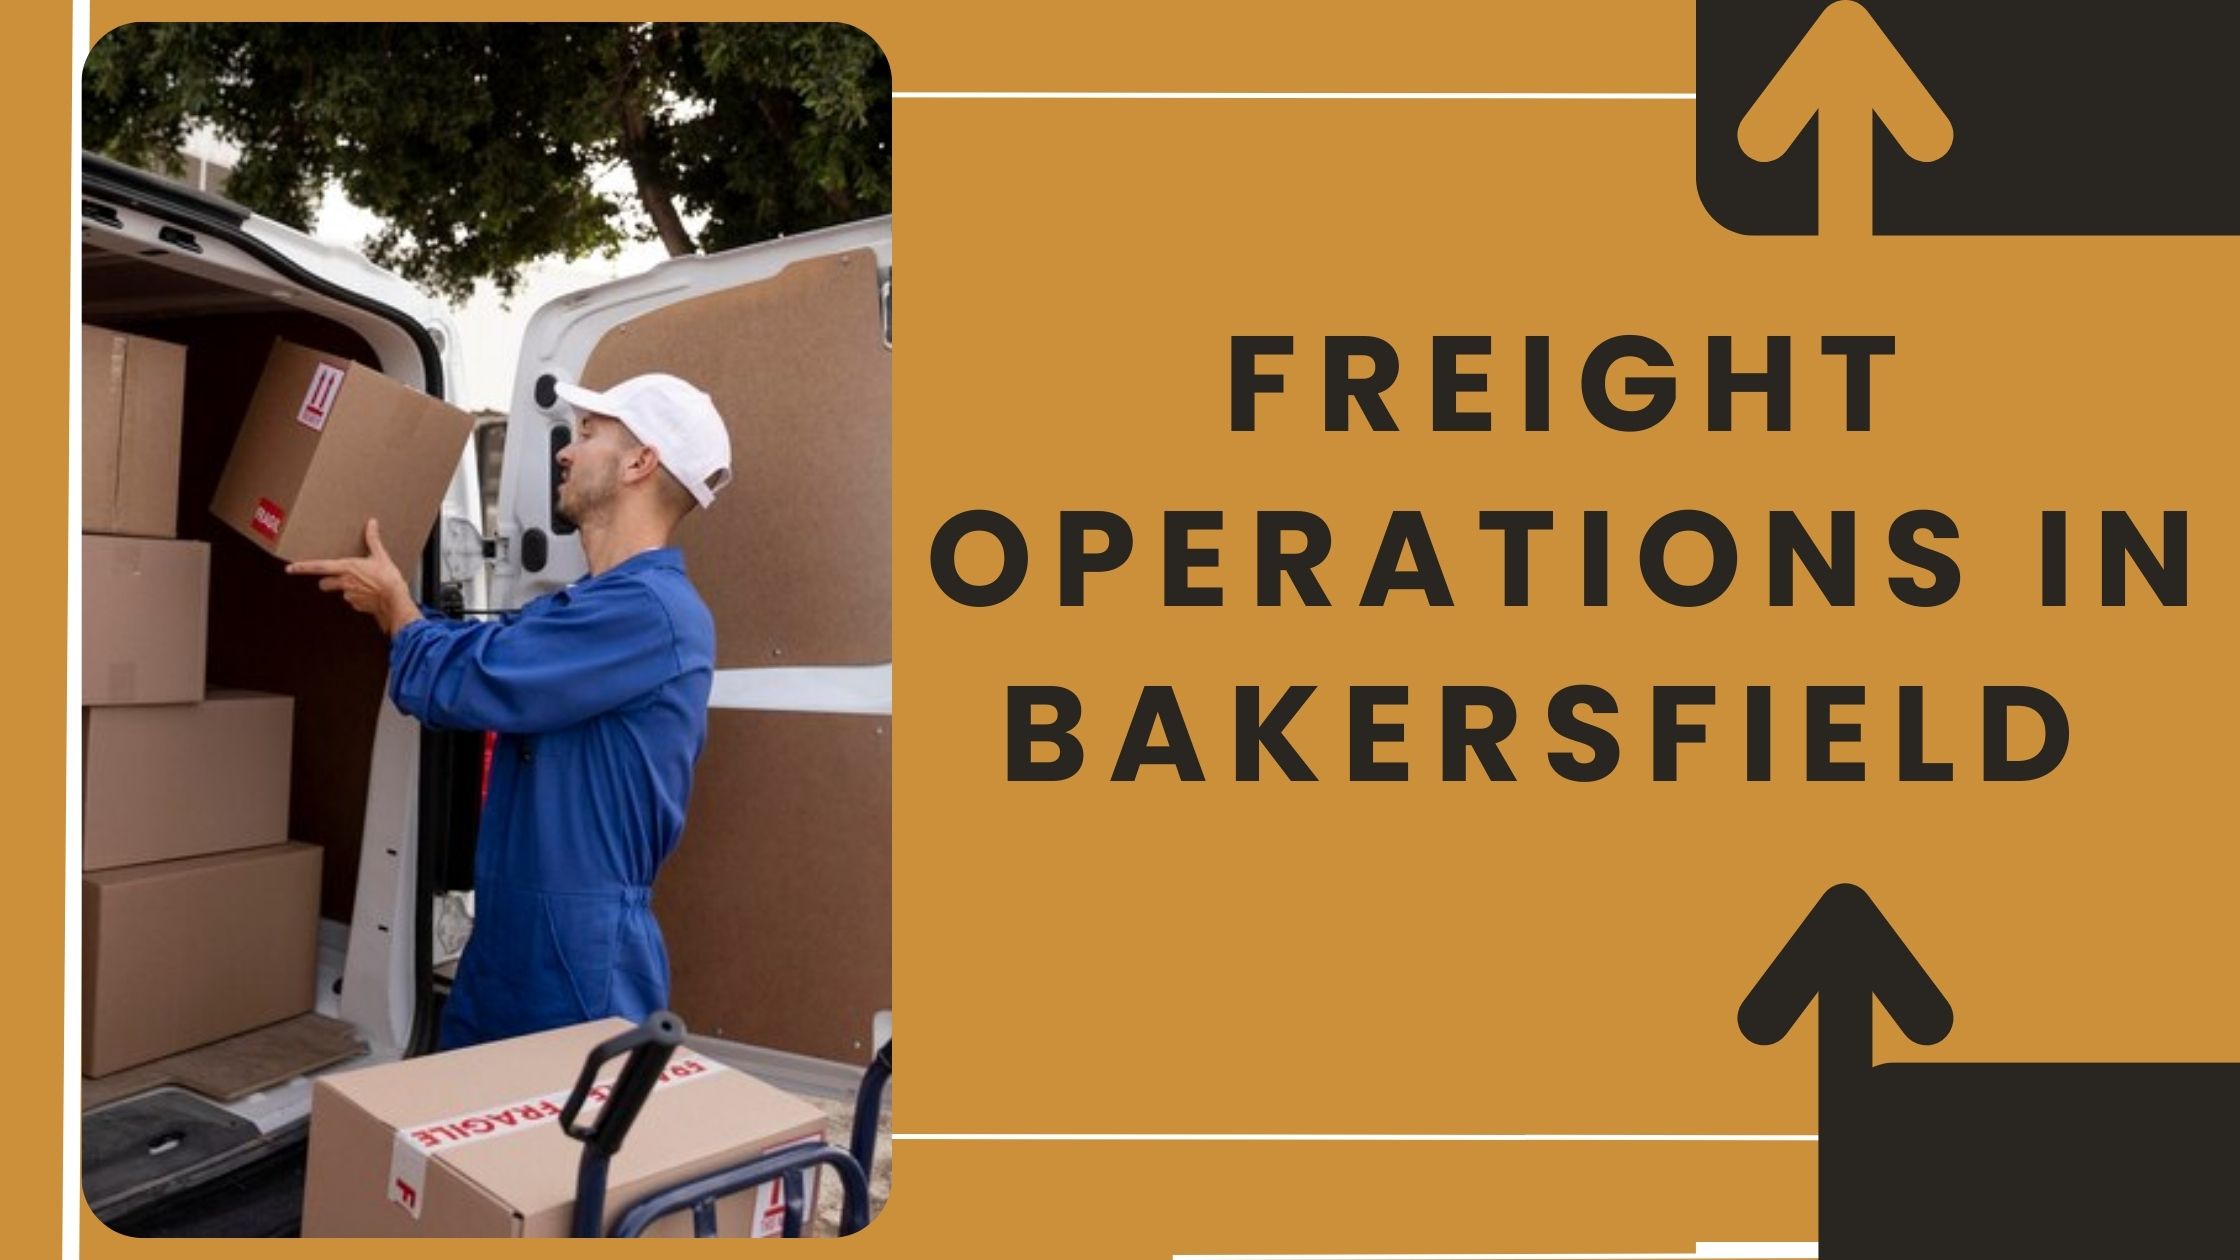 The Ultimate Guide to Streamlining Freight Operations in Bakersfield